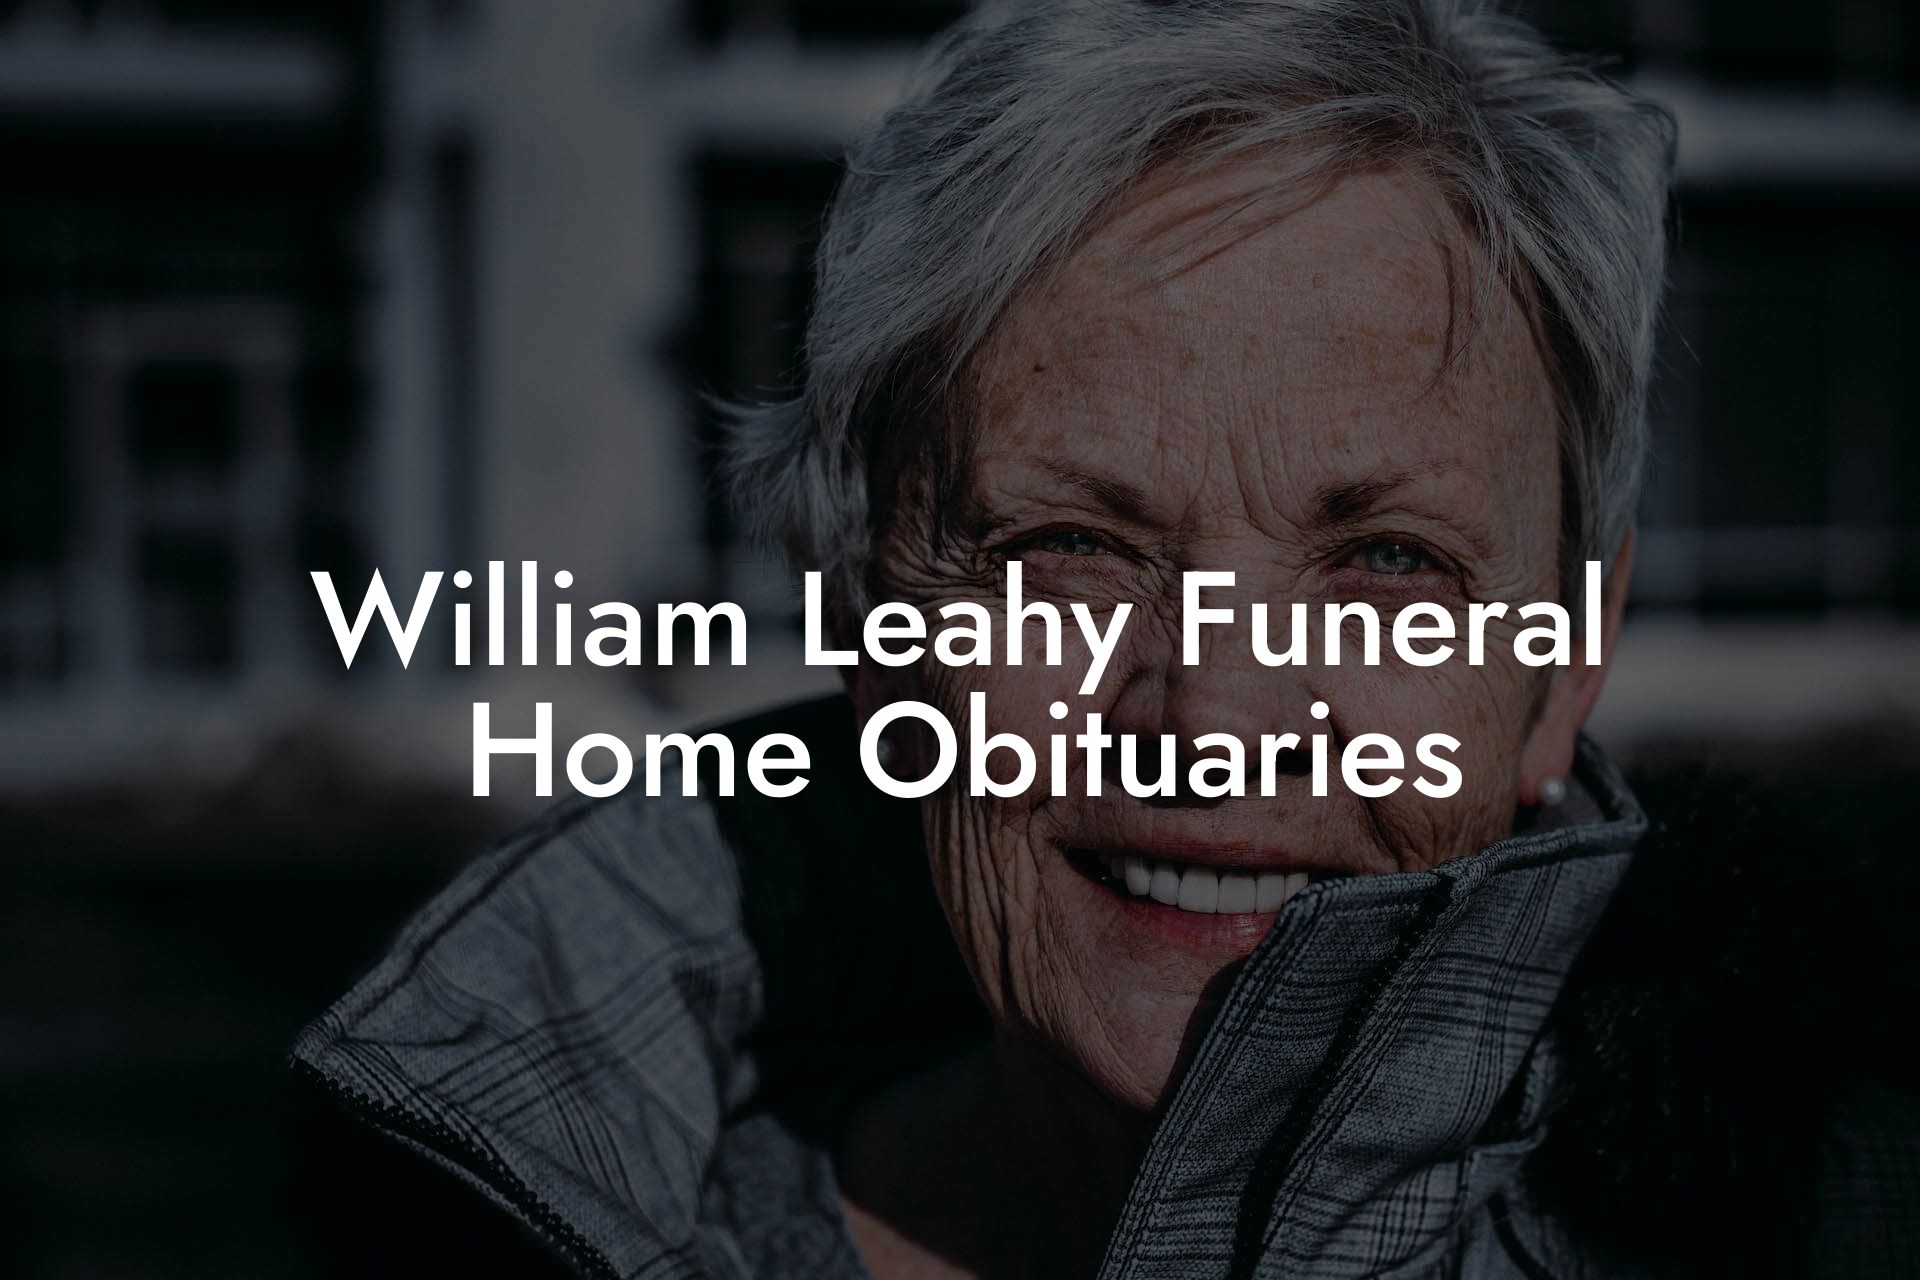 William Leahy Funeral Home Obituaries